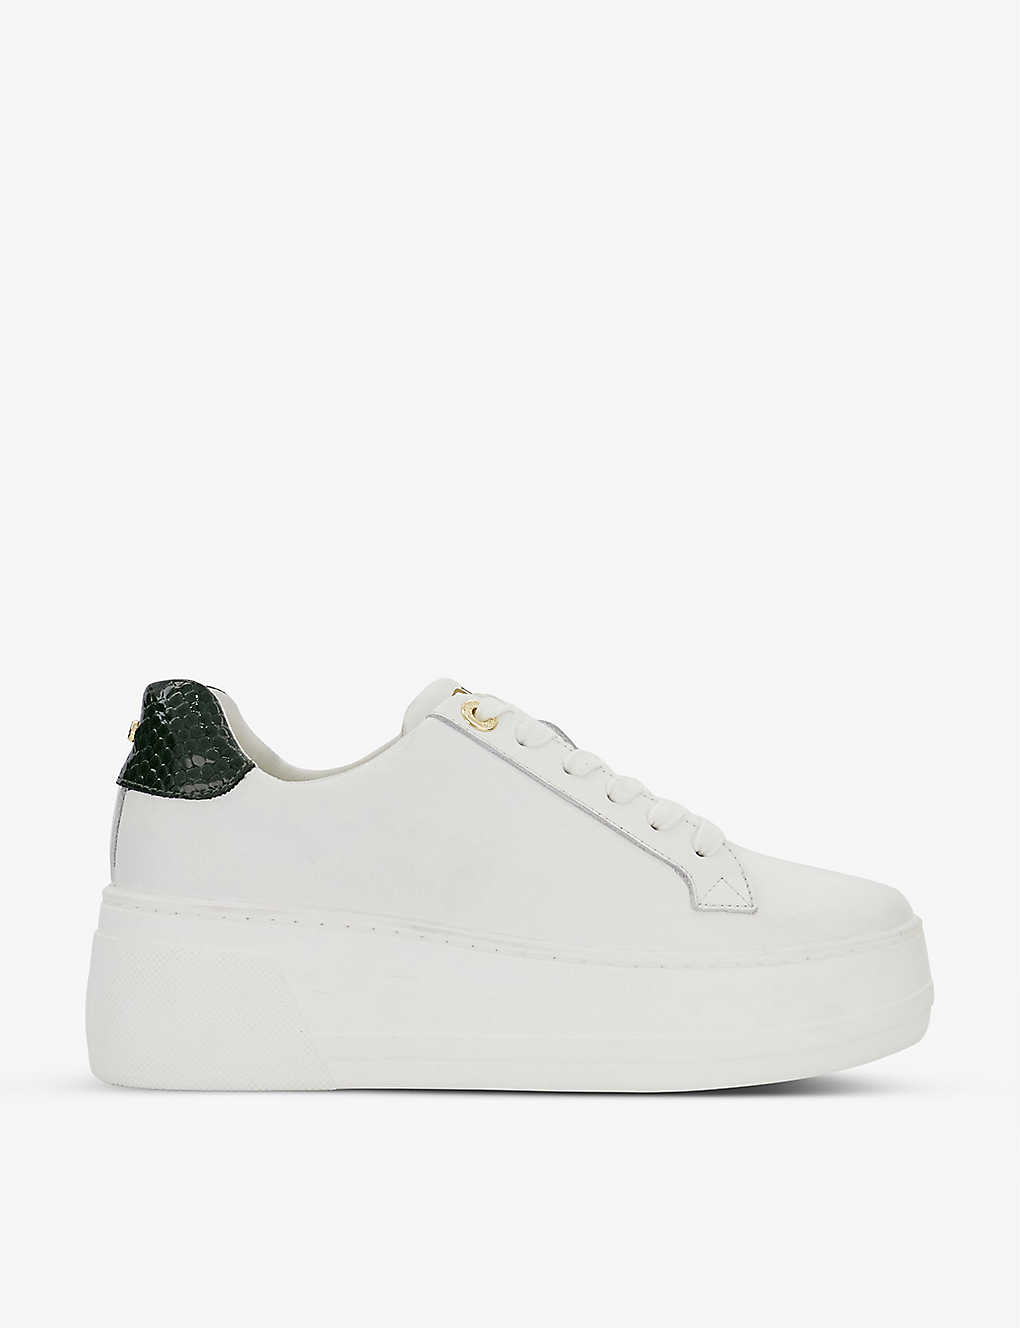 Dune Episode Leather Flatform Low-top Trainers In Green-rept Print Leather